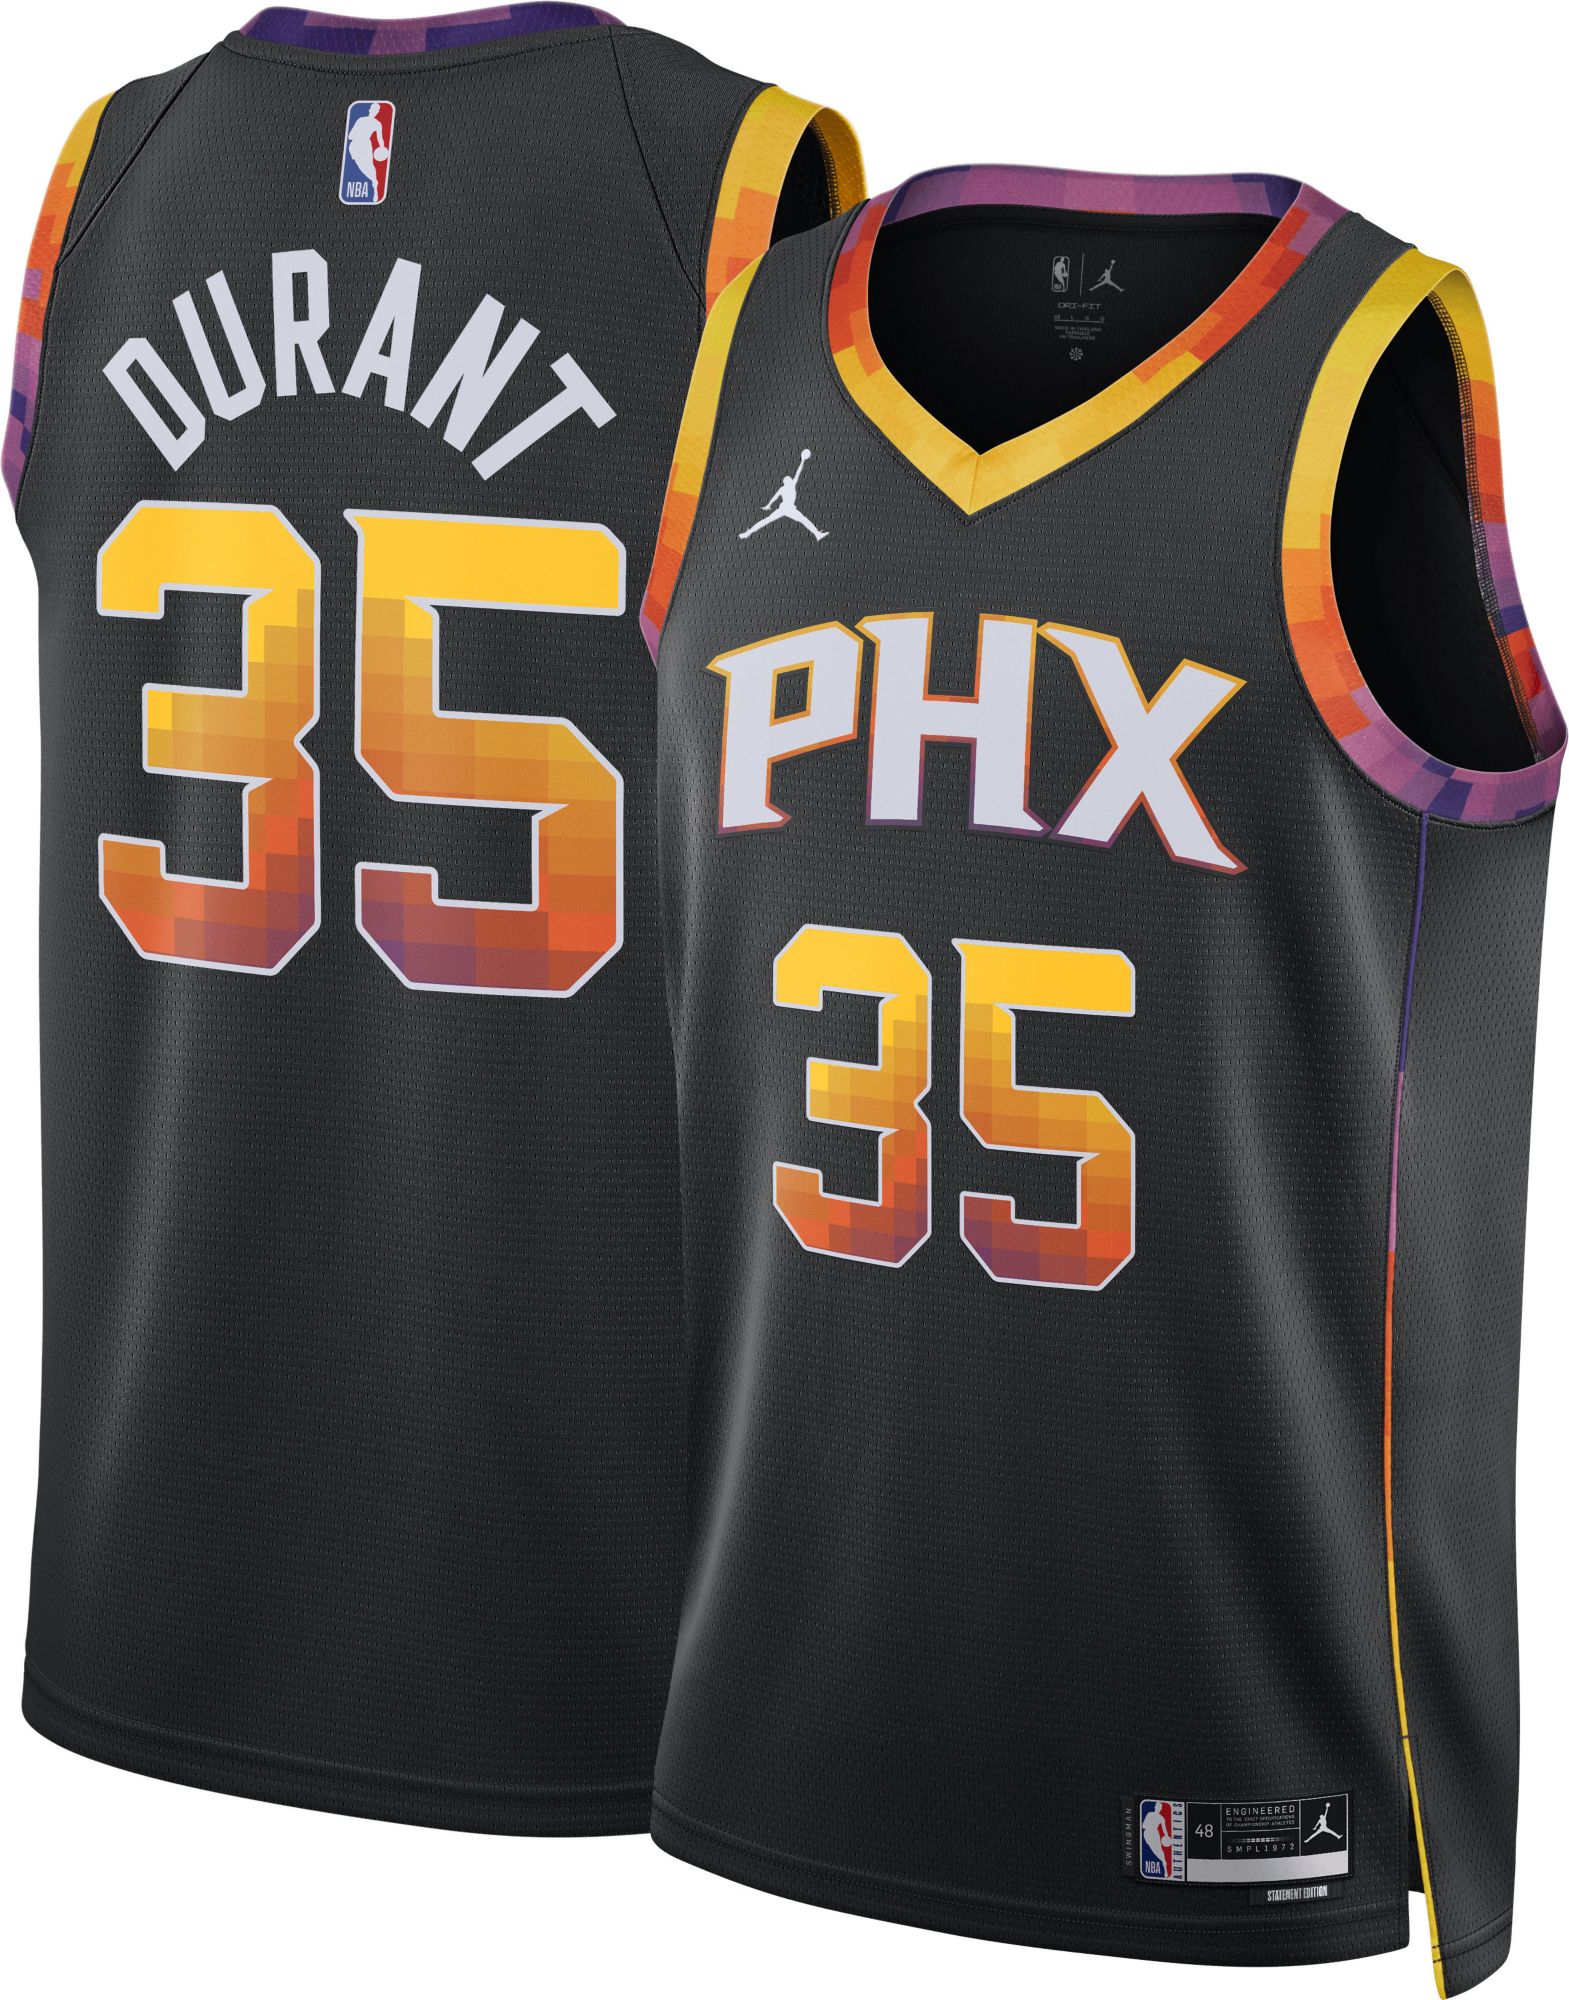 kevin durant jersey mens xl